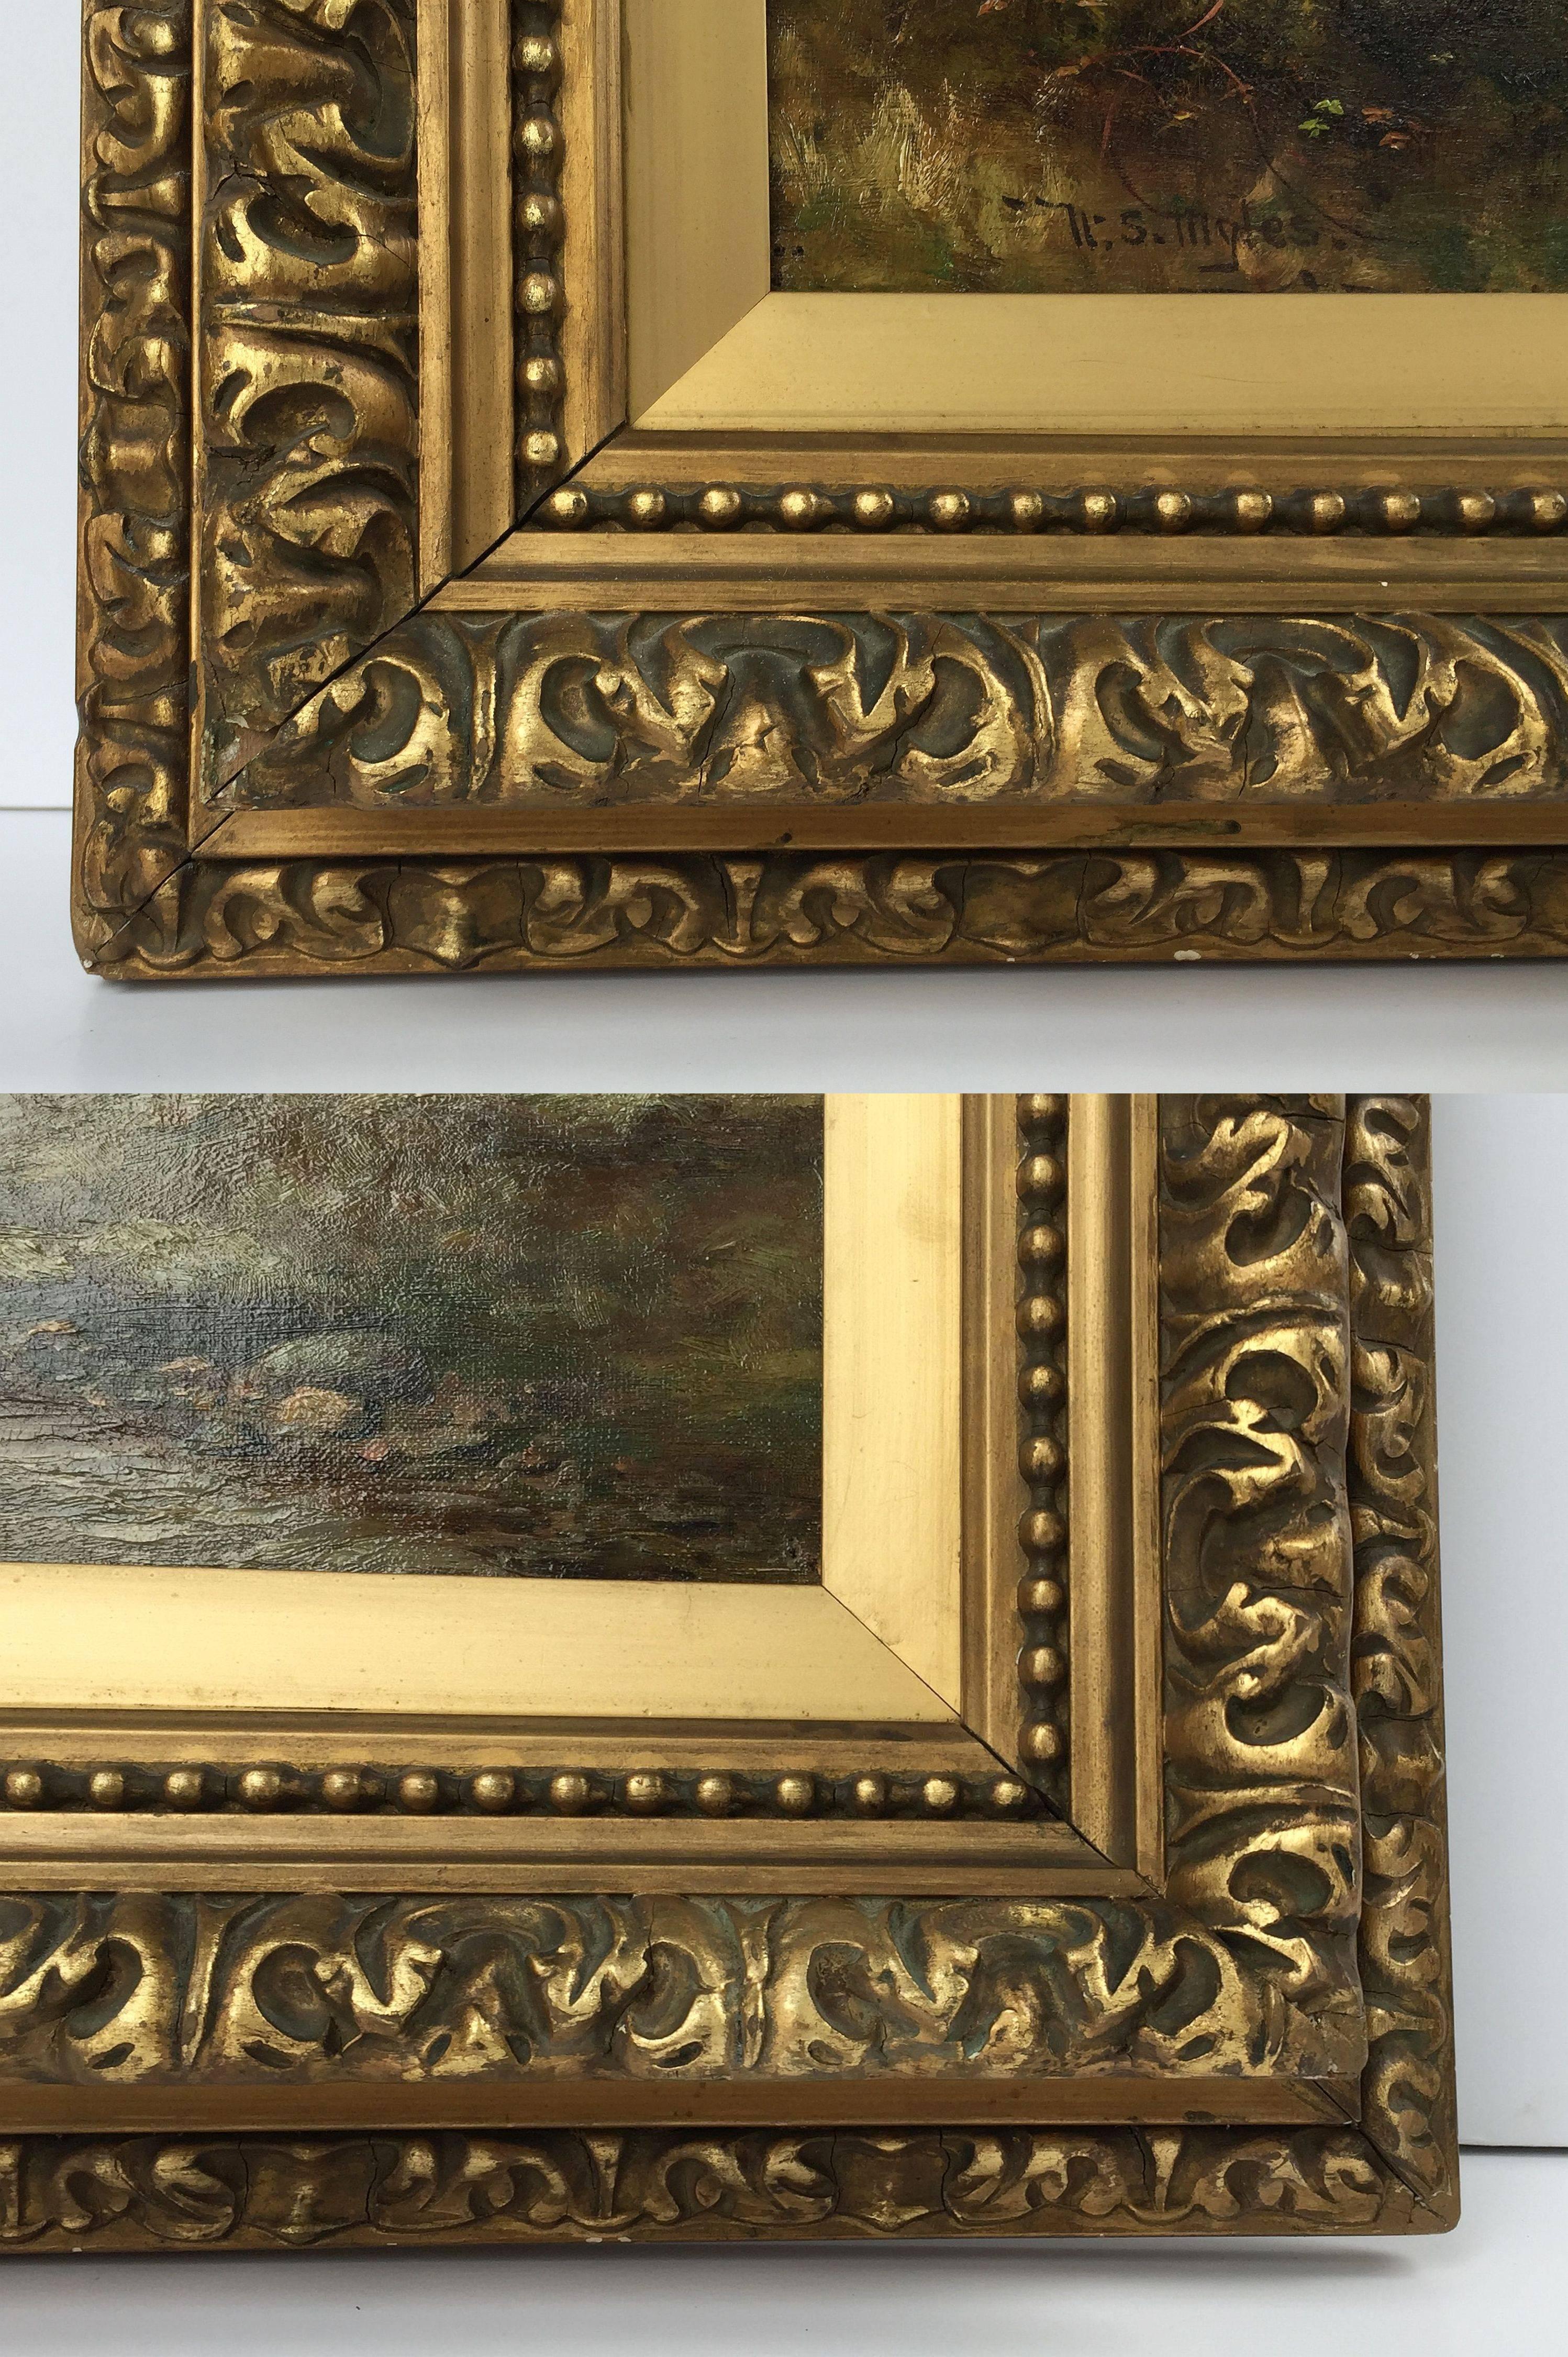 20th Century Framed Landscape Oil Painting on Canvas by W.S. Myles, circa 1850-1911